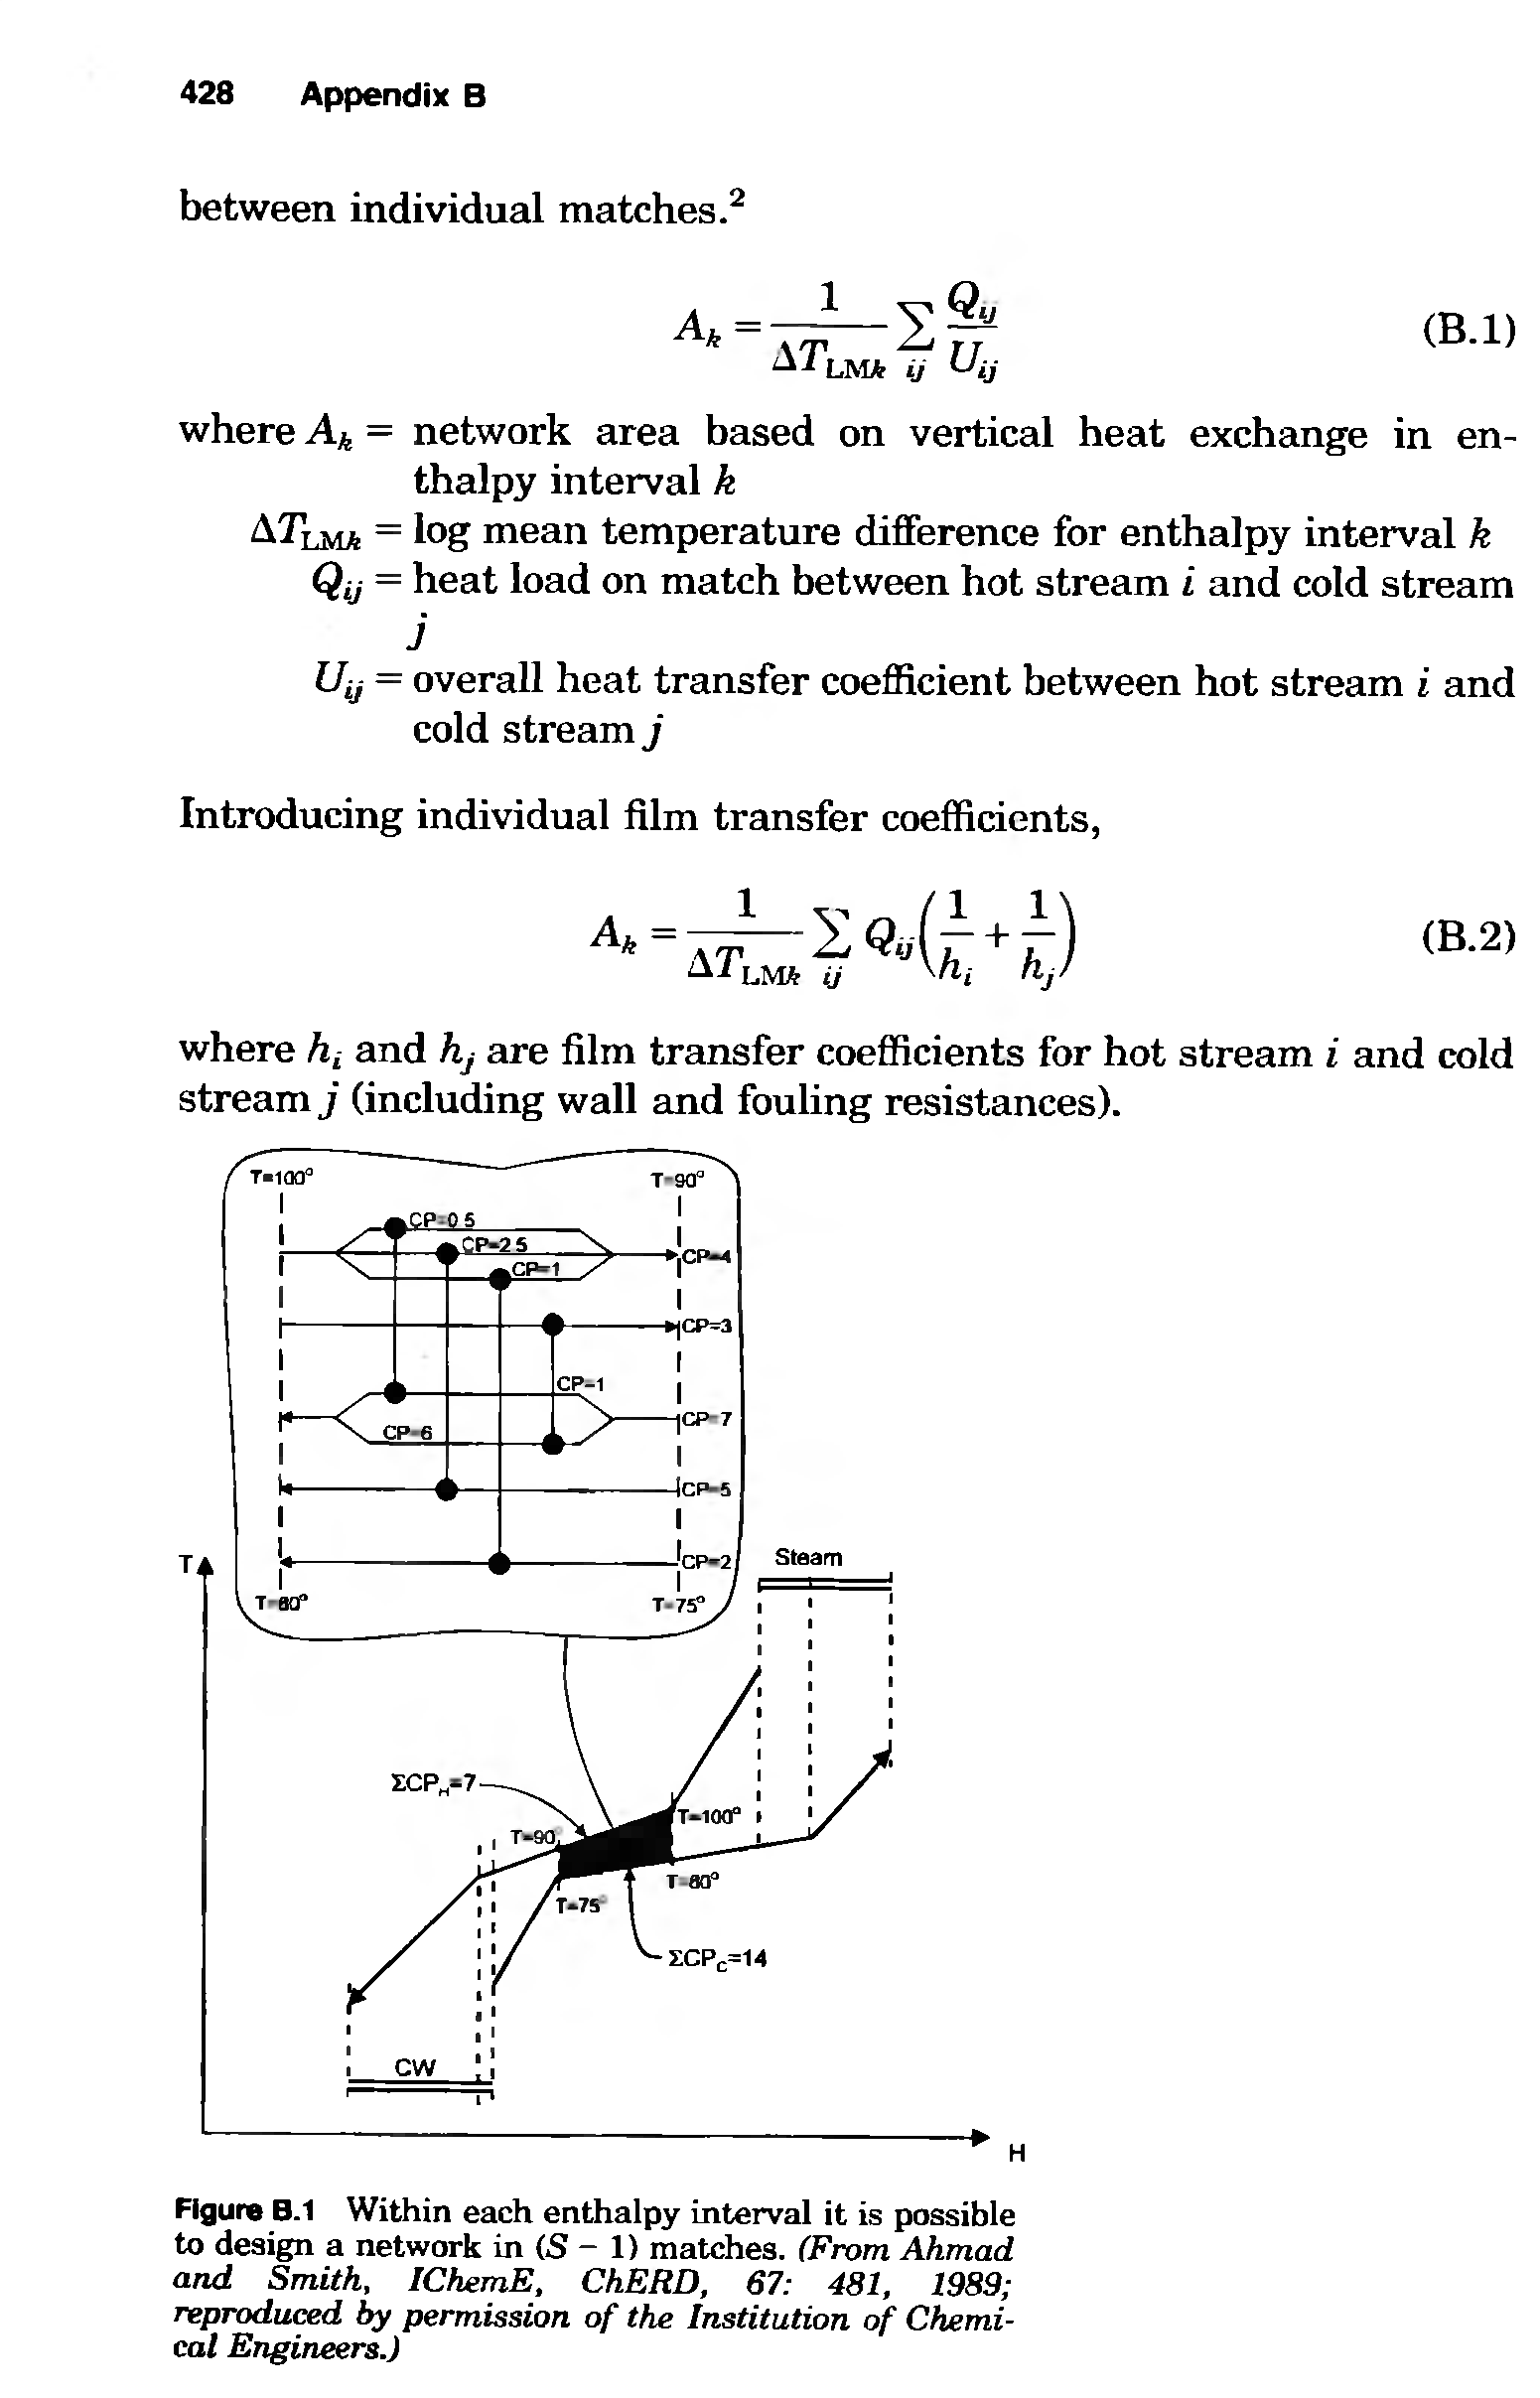 Figure B.l Within each enthalpy interval it is possible to design a network in (S - 1) matches. (From Ahmad and Smith, IChemE, ChERD, 67 481, 1989 ...